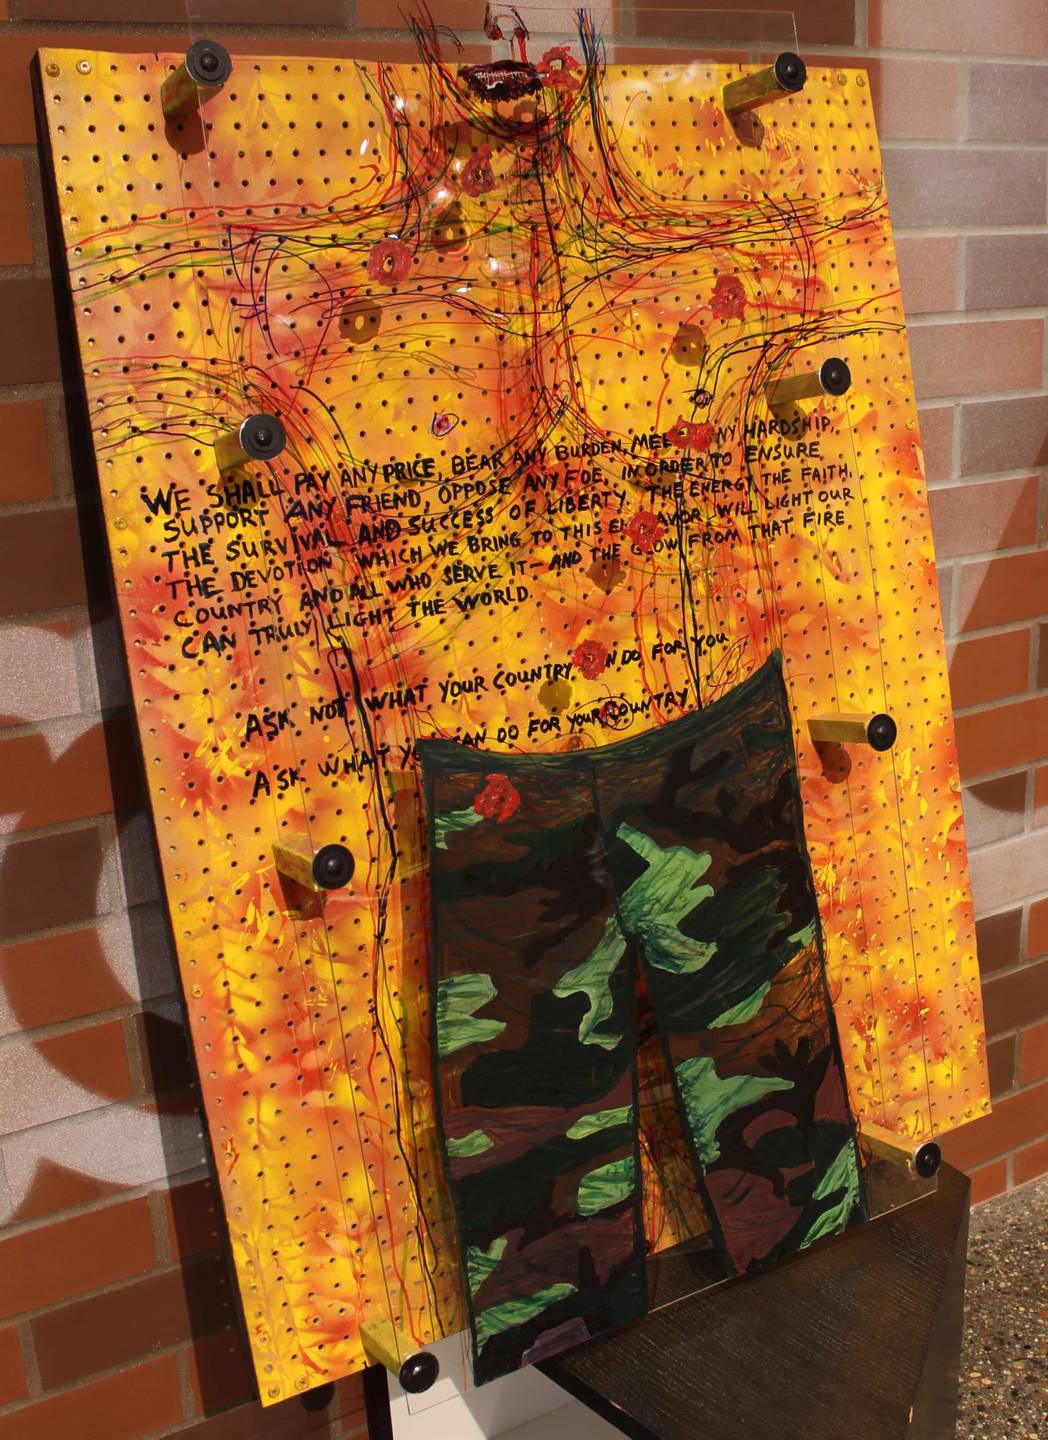 Mixed-media image: pegboard painted orange and red, plexiglass with a shirtless soldier drawn on, bullet holes, and text: We shall pay any price, bear any burden, meet any hardship, support any friend, oppose any foe, in order to ensure the survival and success of liberty..."